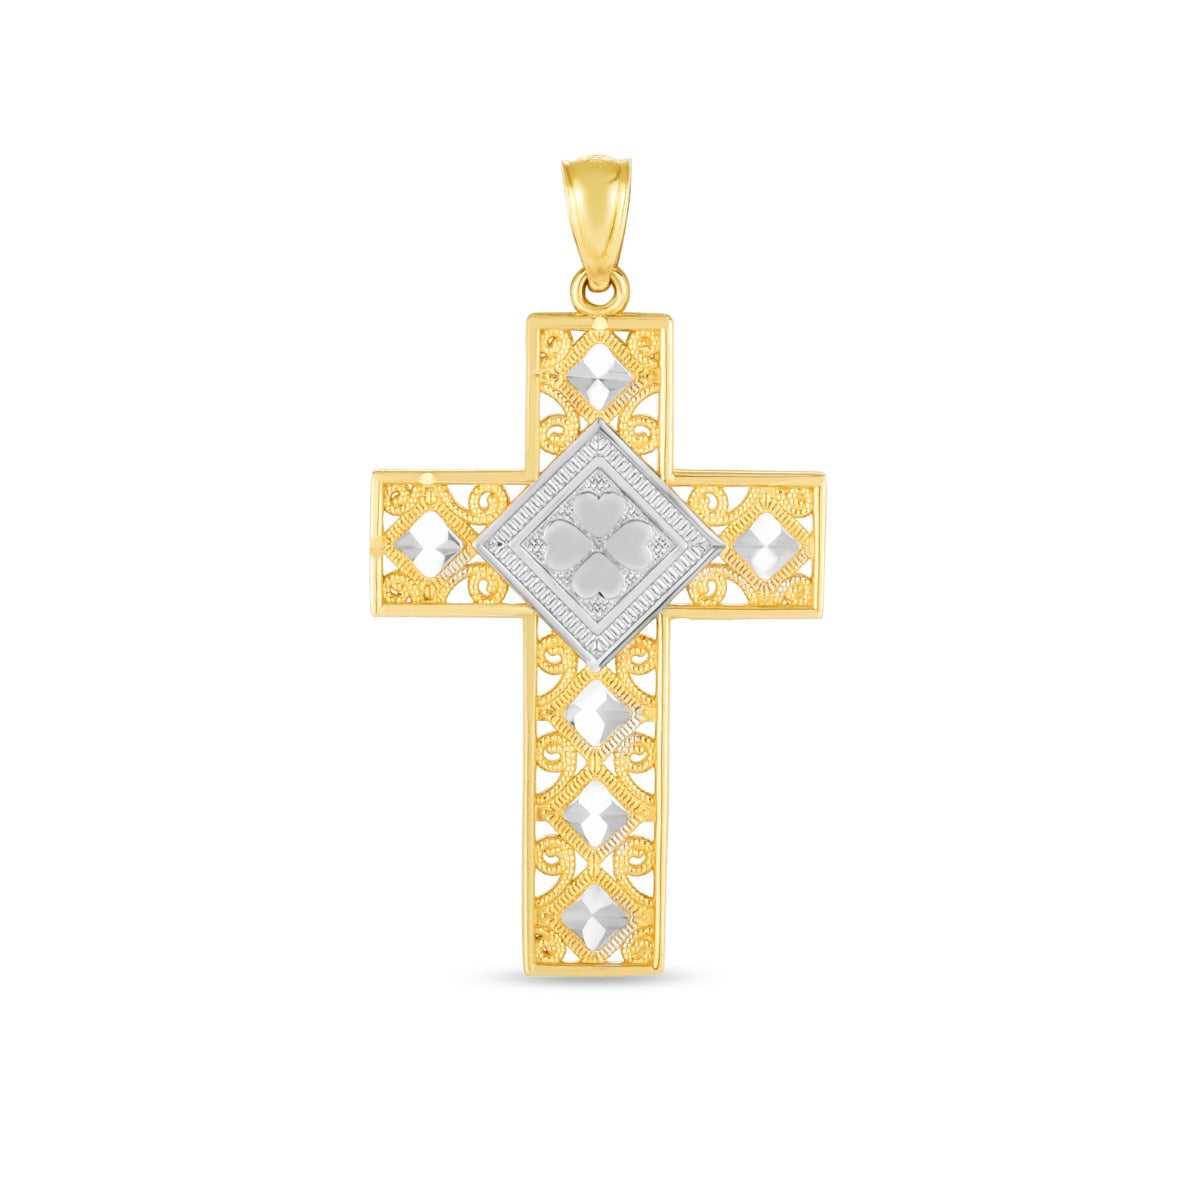 14K Two-Tone Diamond Cut Cross Pendant with Textures and 4 Hearts in the Center